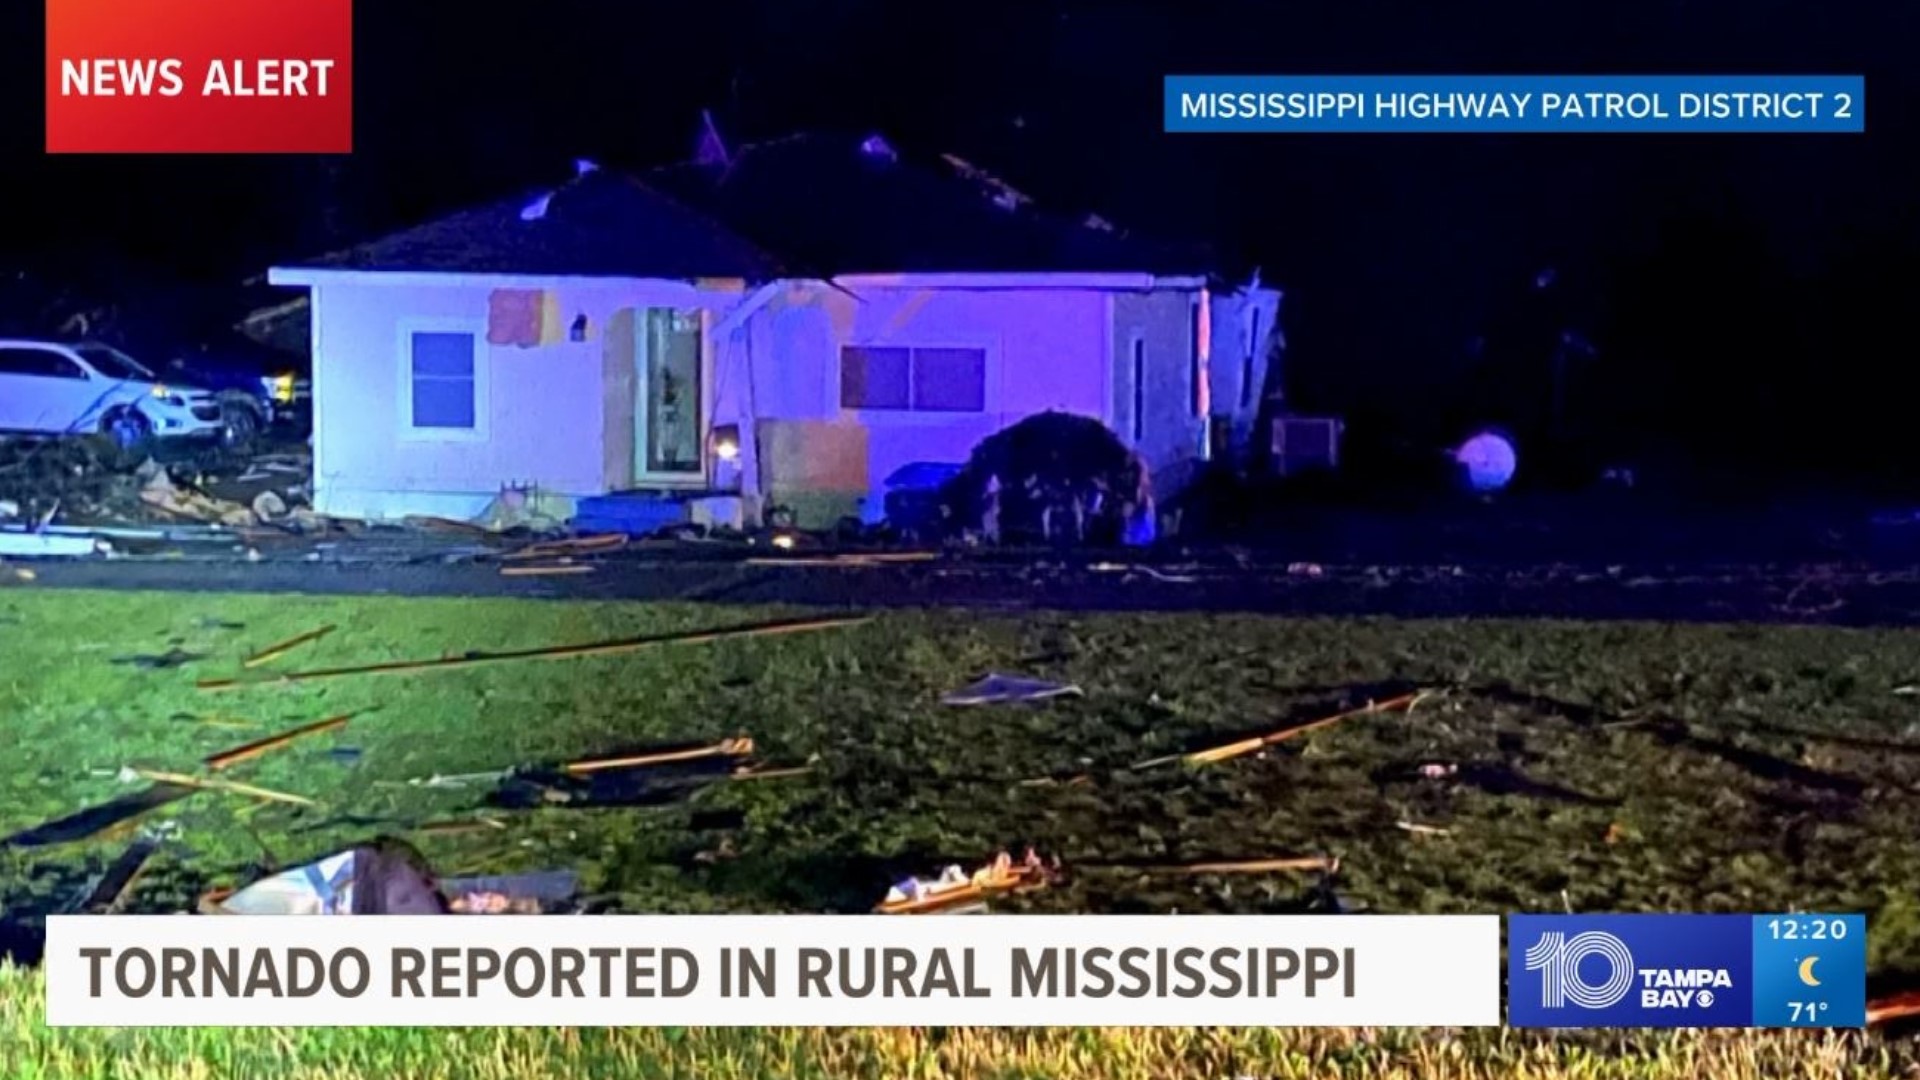 The National Weather Service confirmed a tornado caused damage about 60 miles northeast of Jackson, Mississippi.